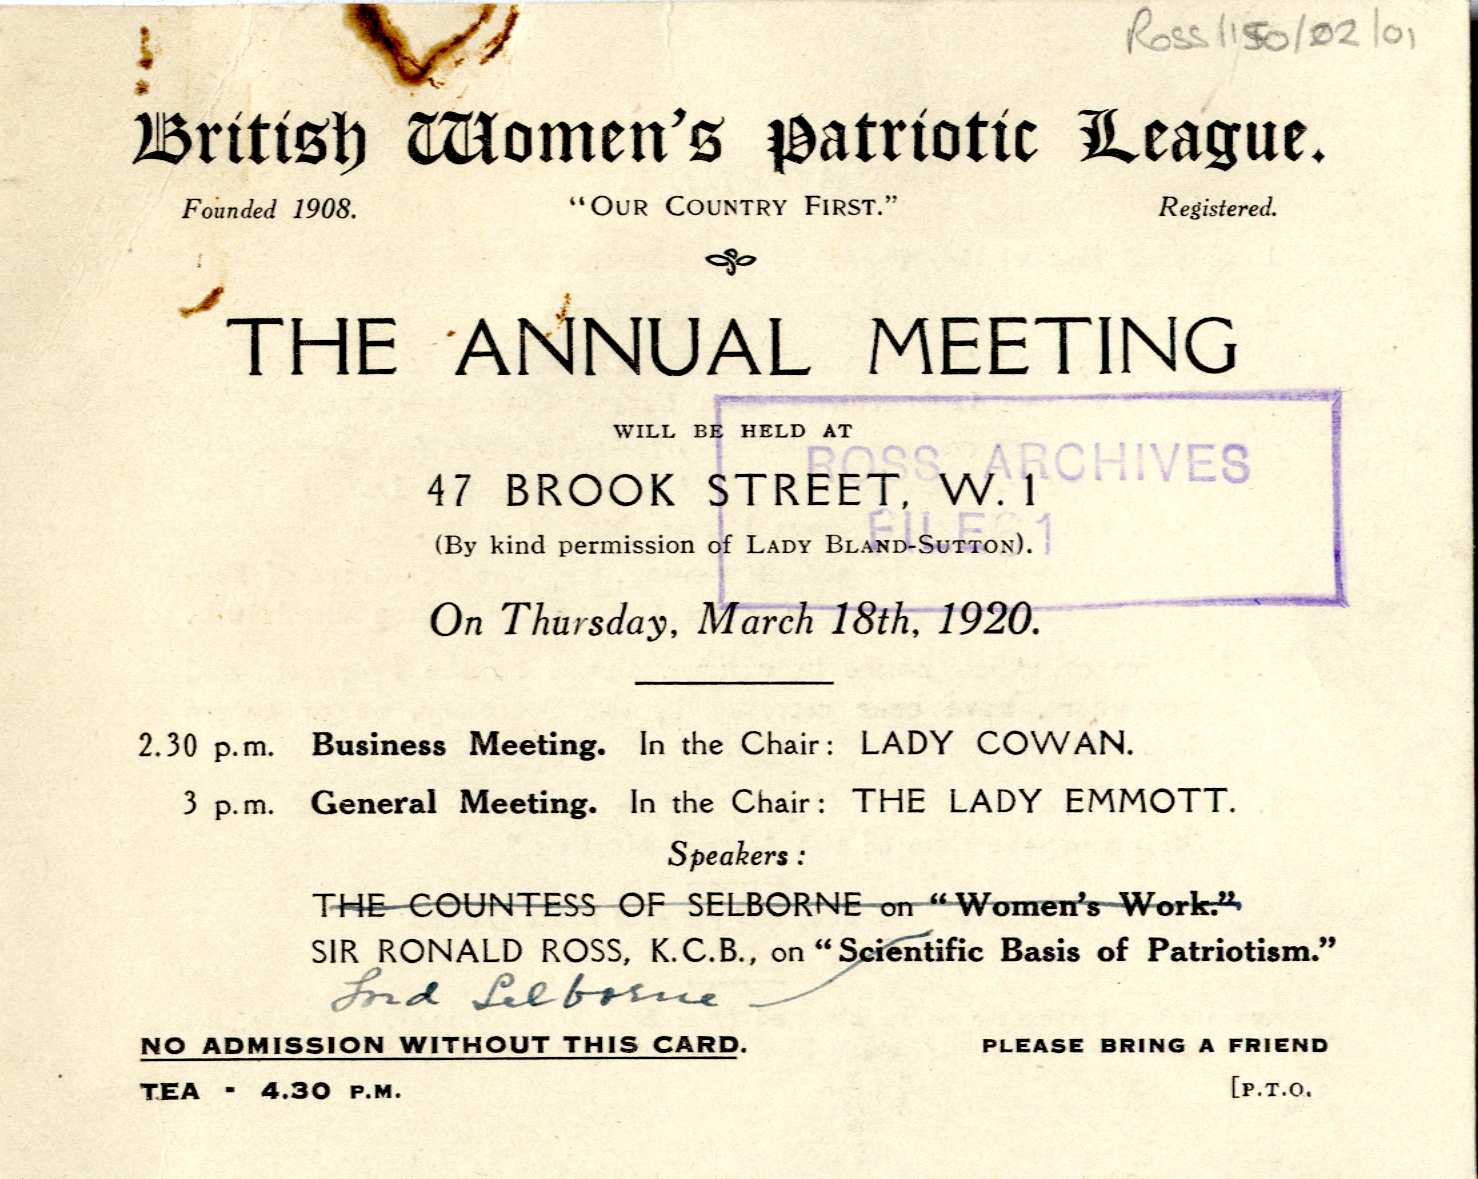 Ticket to the Annual Meeting of the British Women’s Patriotic League